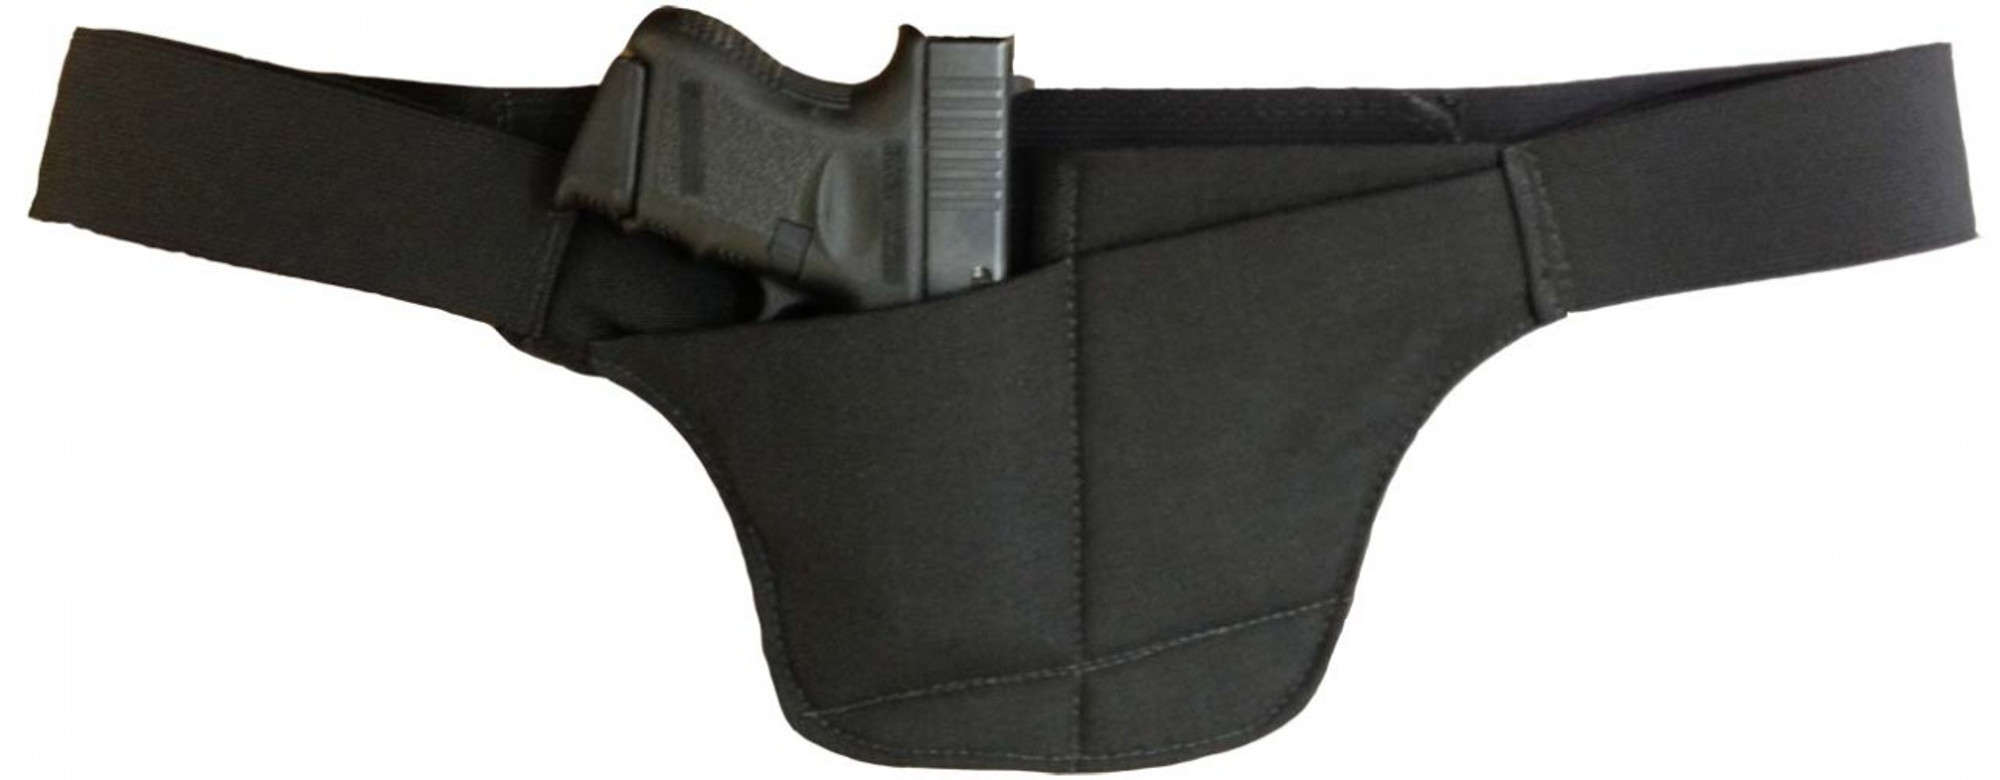 3. Factors to Consider When Choosing a Deep Concealment Holster for a Larger Firearm